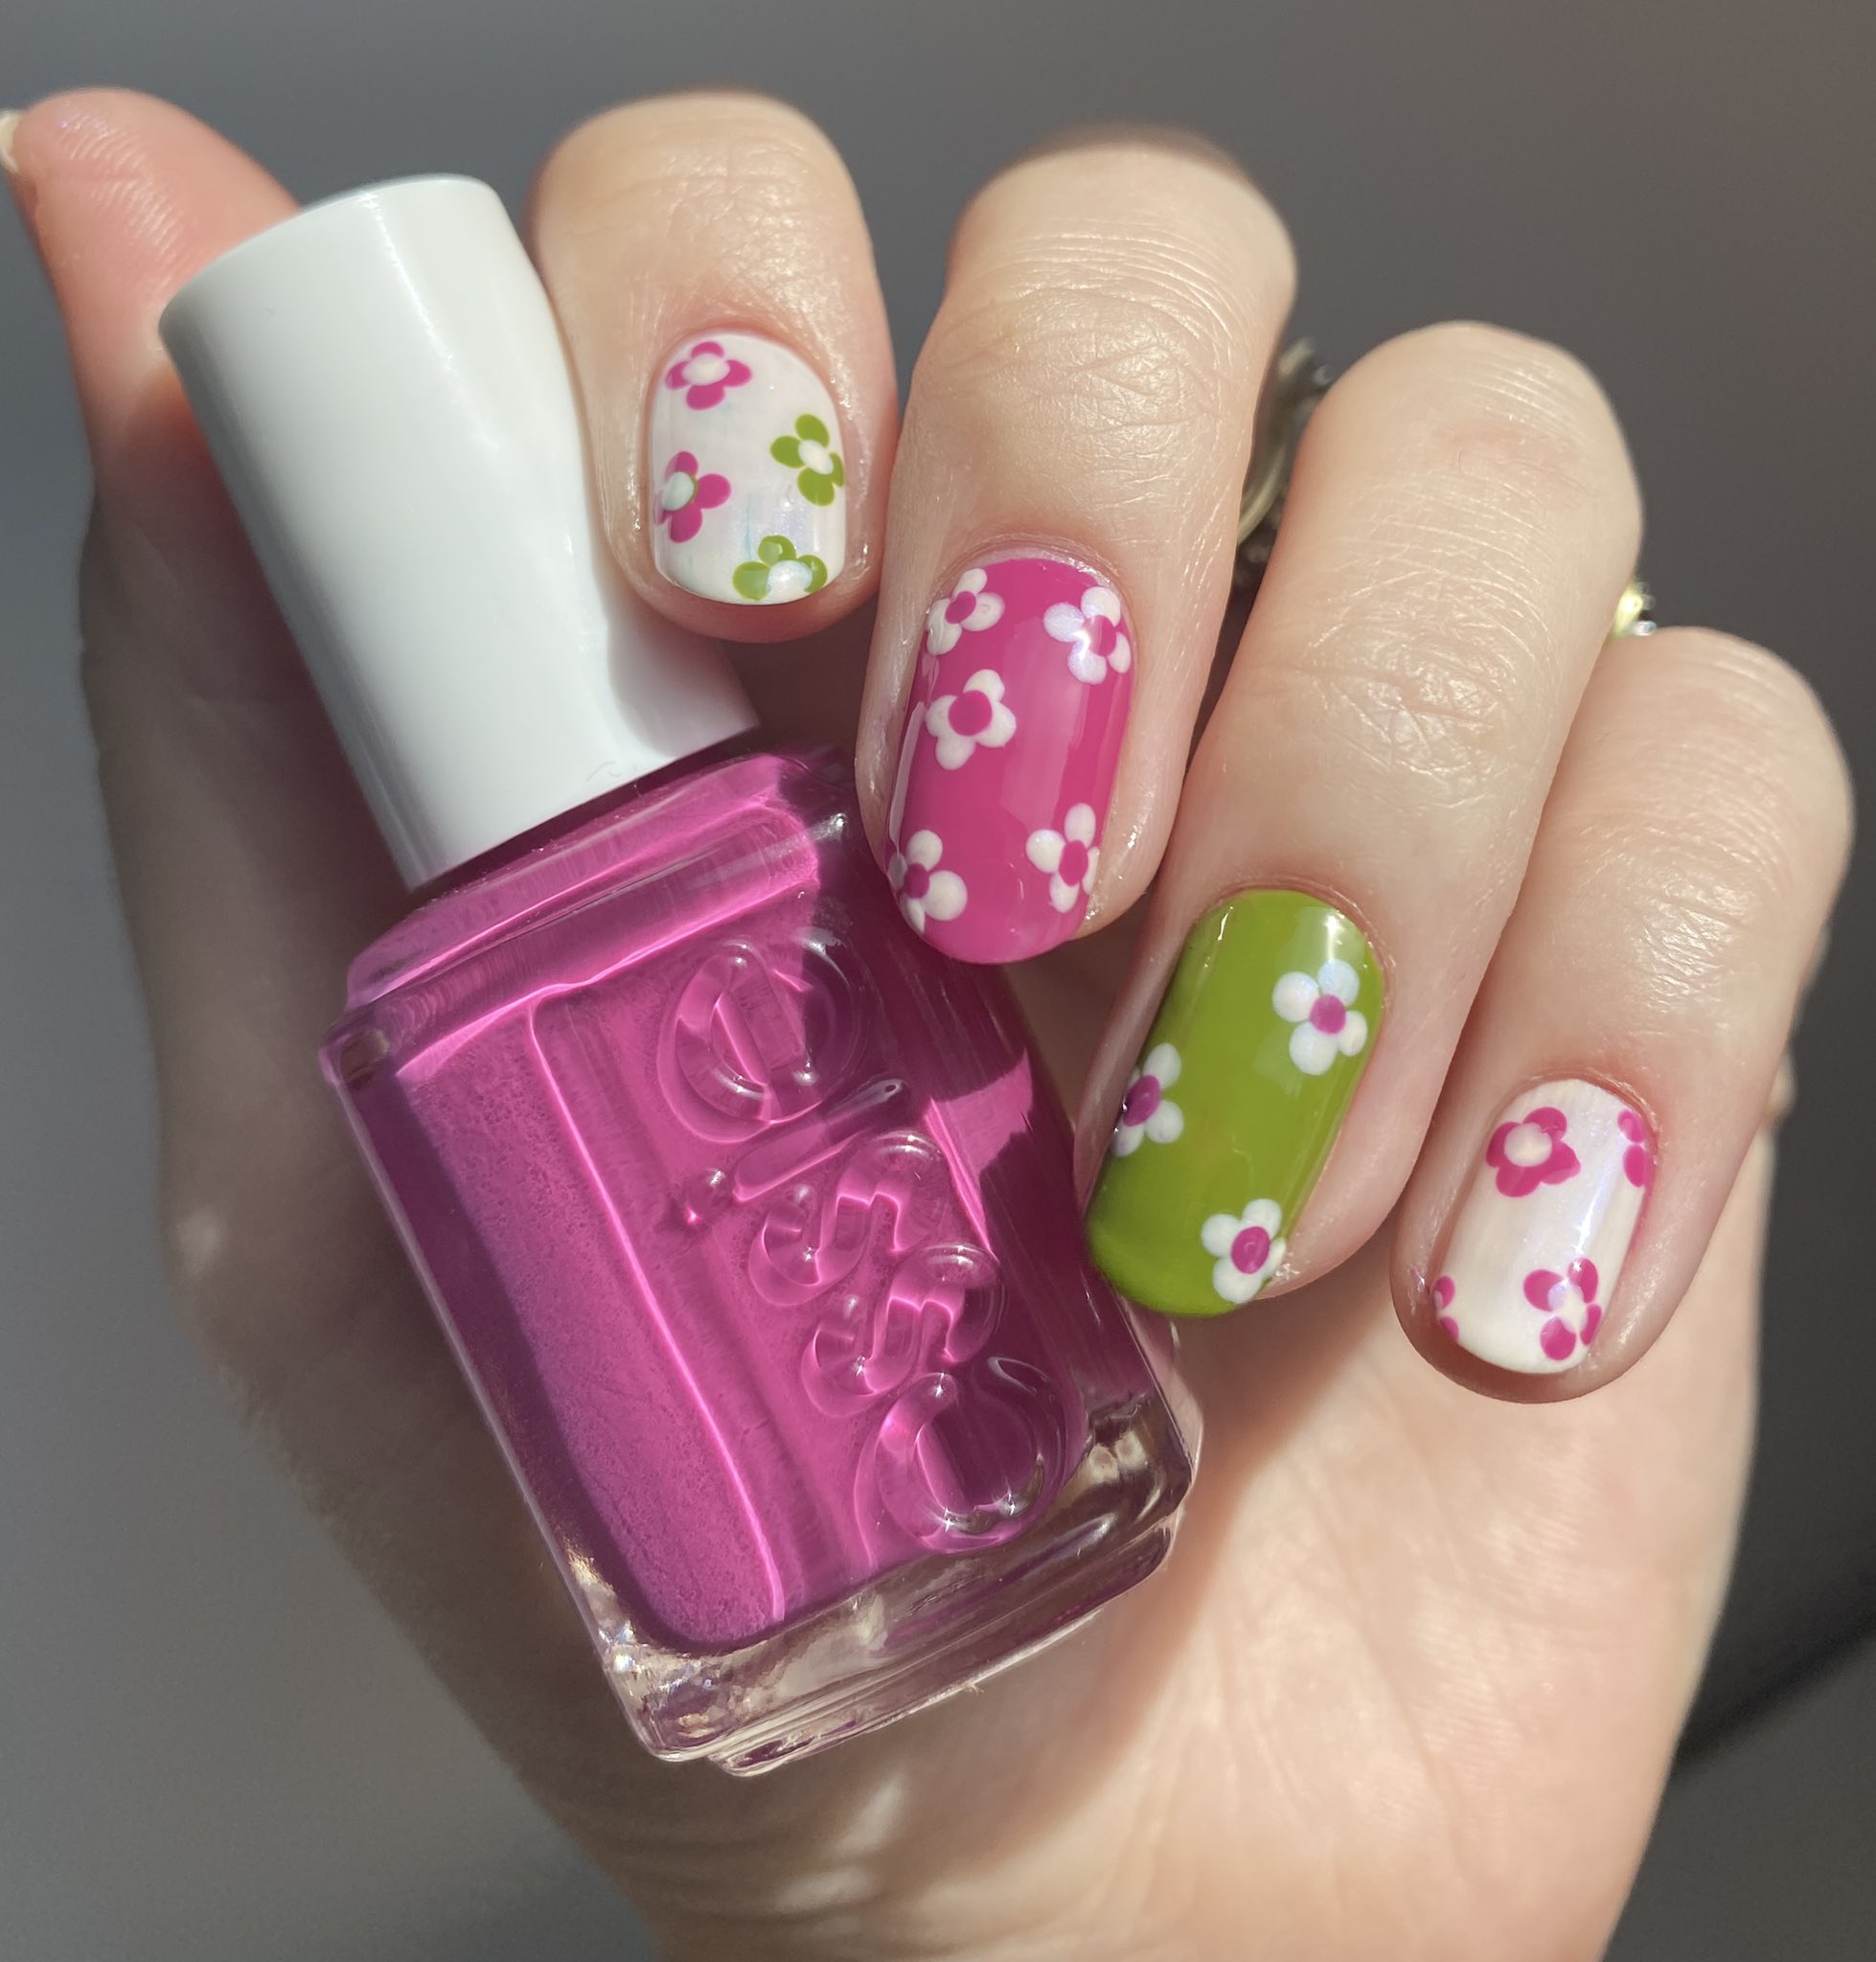 Floral Nail Designs For Spring? Groundbreaking - Elle India